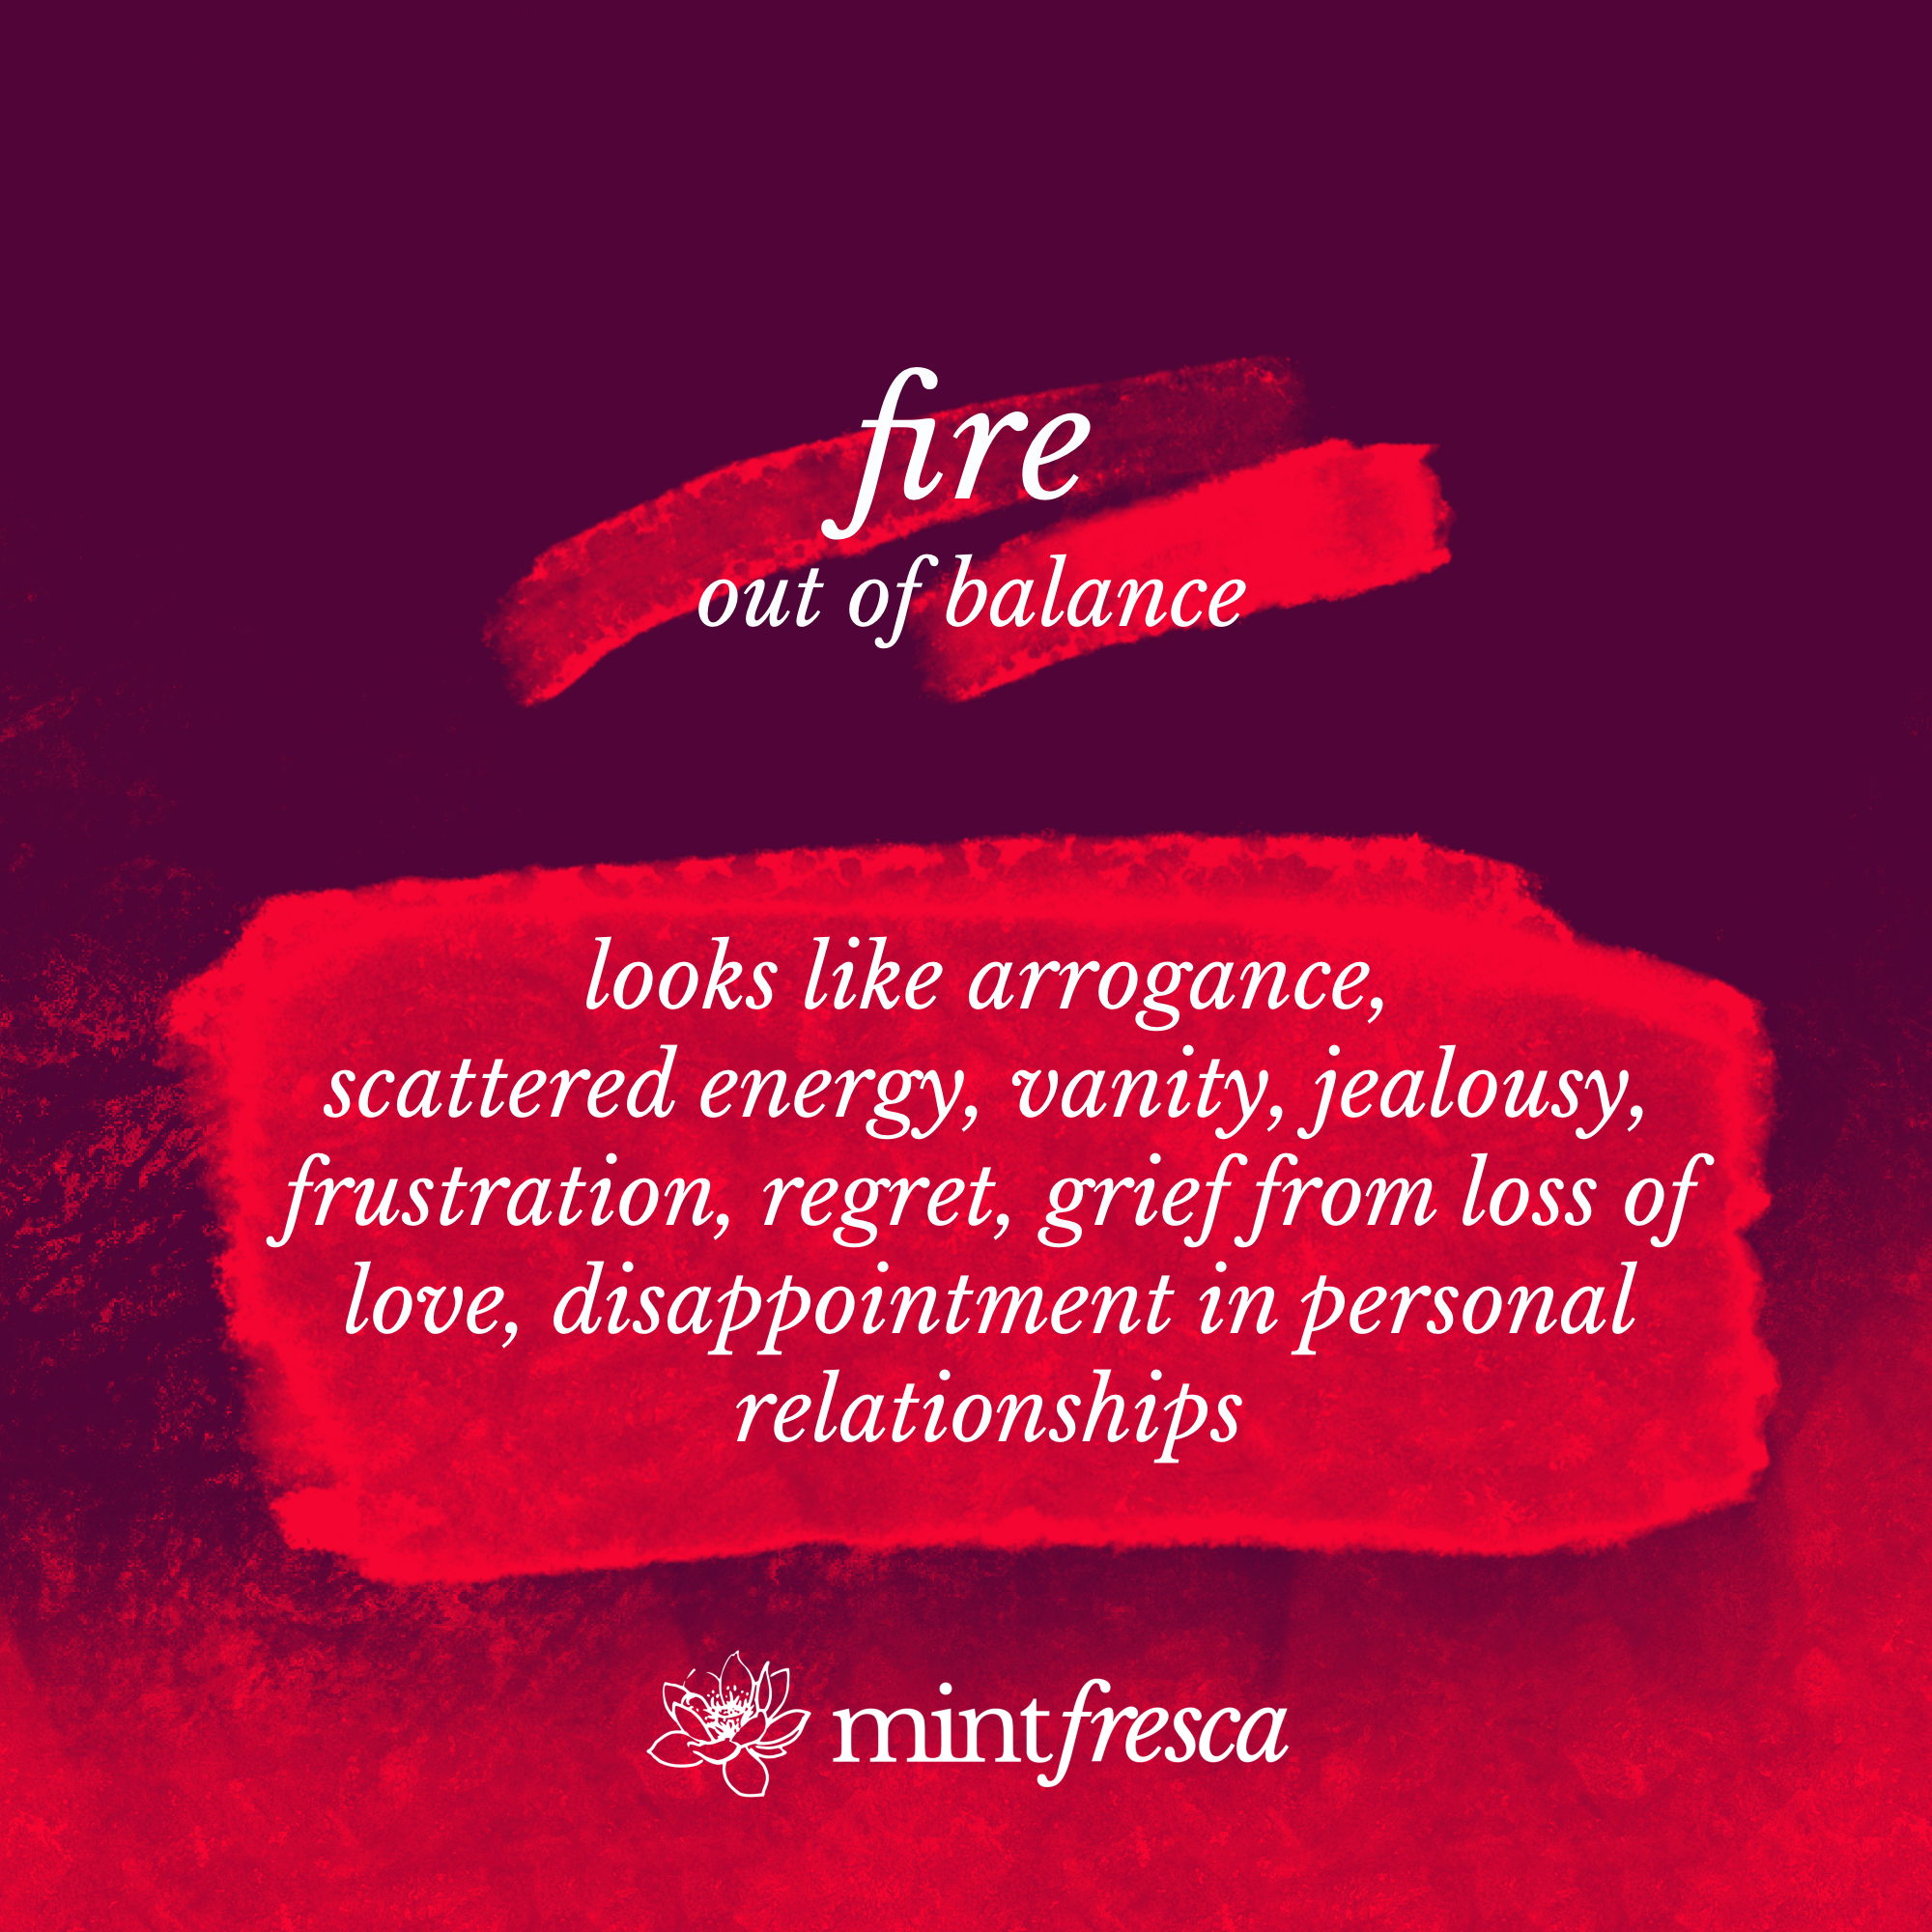 fire out of balance